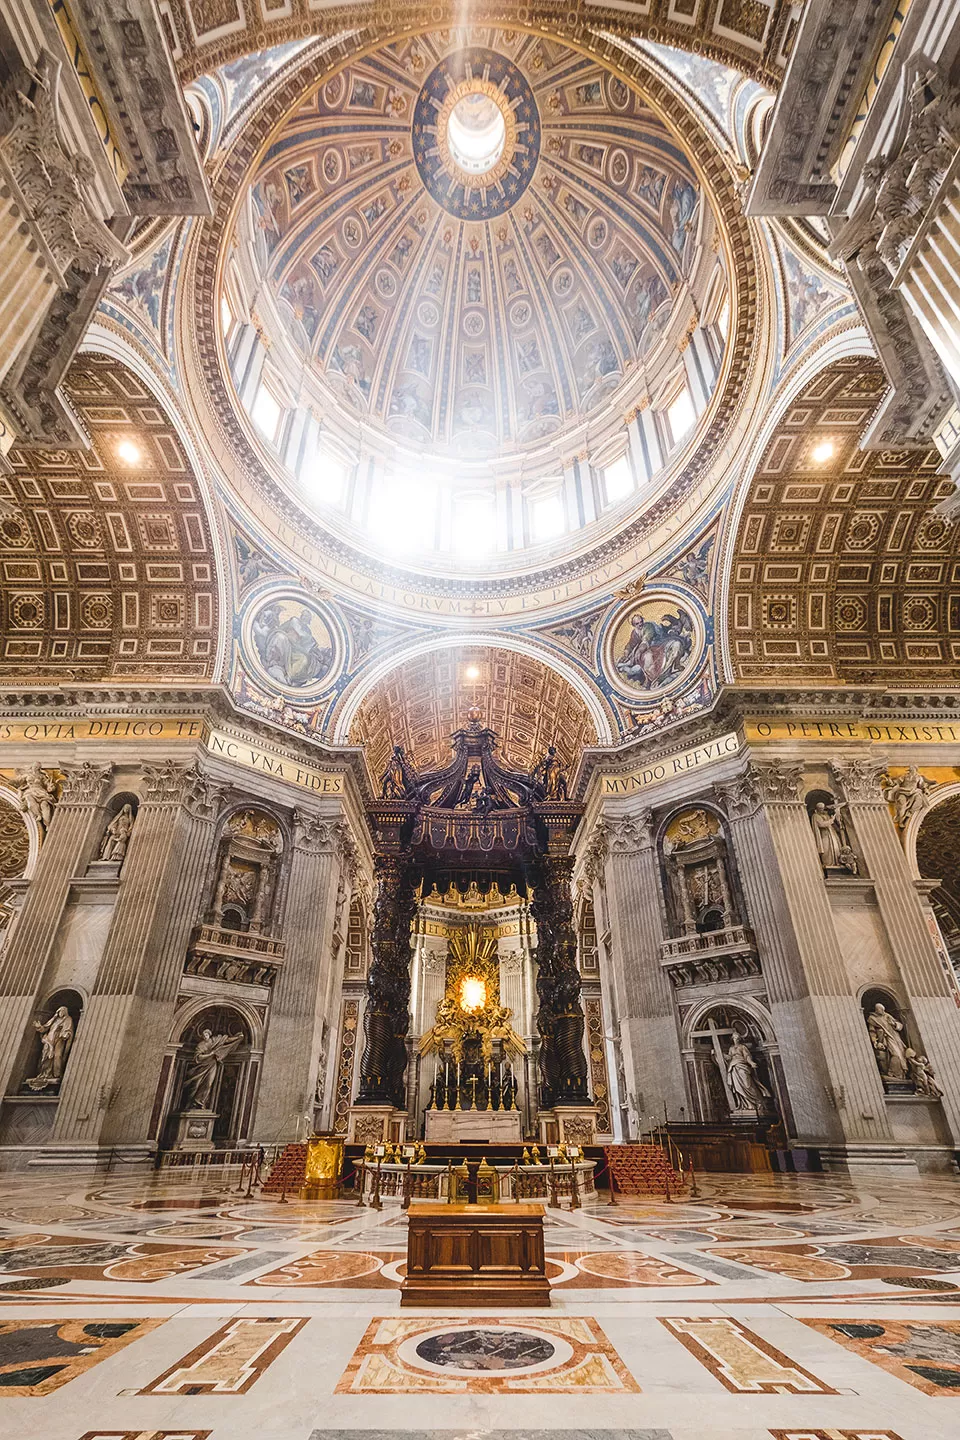 Italy Facts - Inside St Peter's Basilica in Vatican City the biggest cathedral in the world